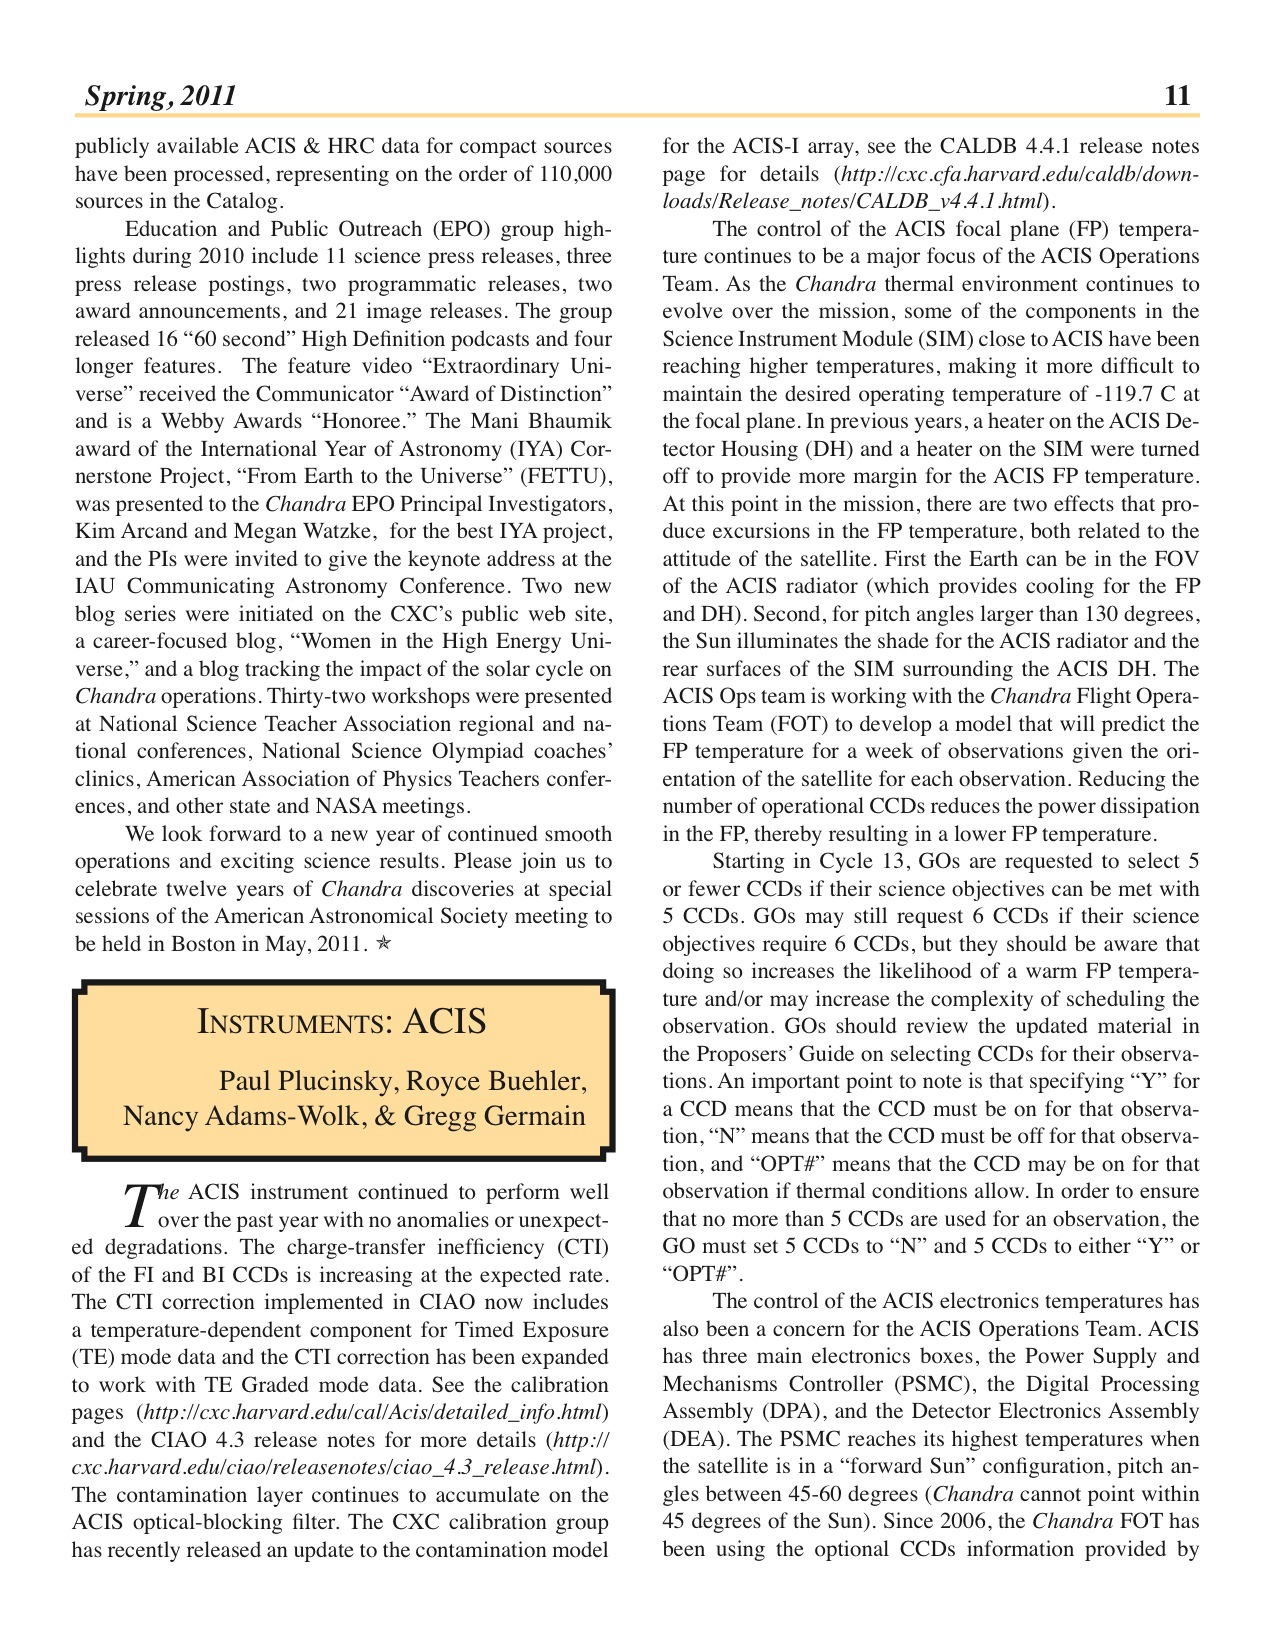 Page 11 of the Chandra Newsletter, issue 18.